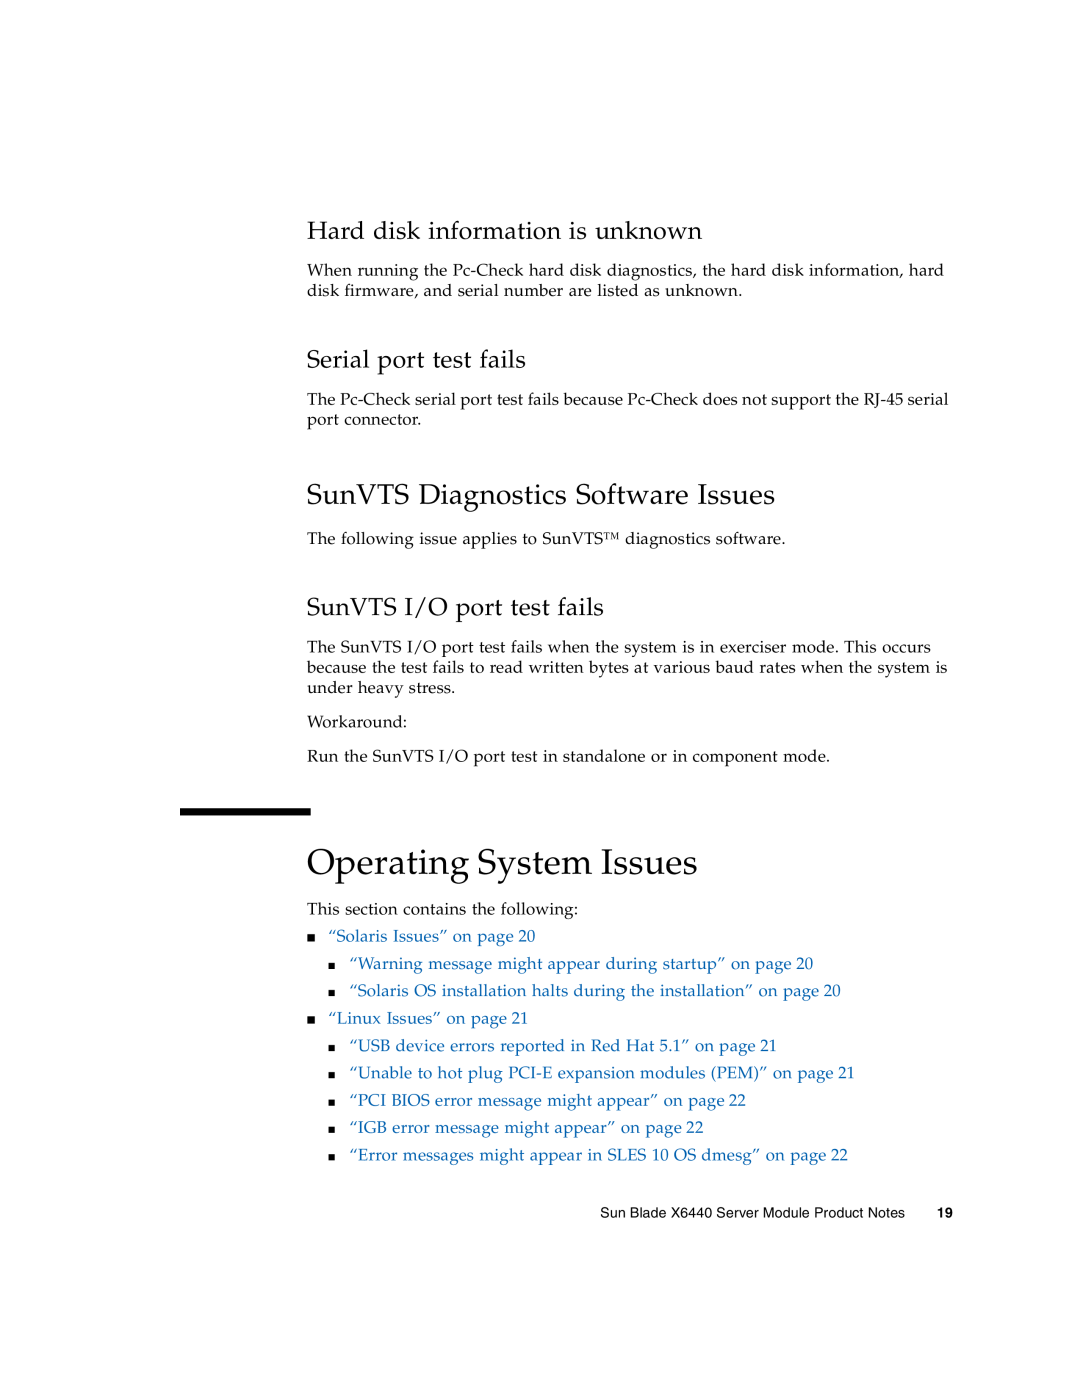 Sun Microsystems X6440 manual Operating System Issues, SunVTS Diagnostics Software Issues, Hard disk information is unknown 